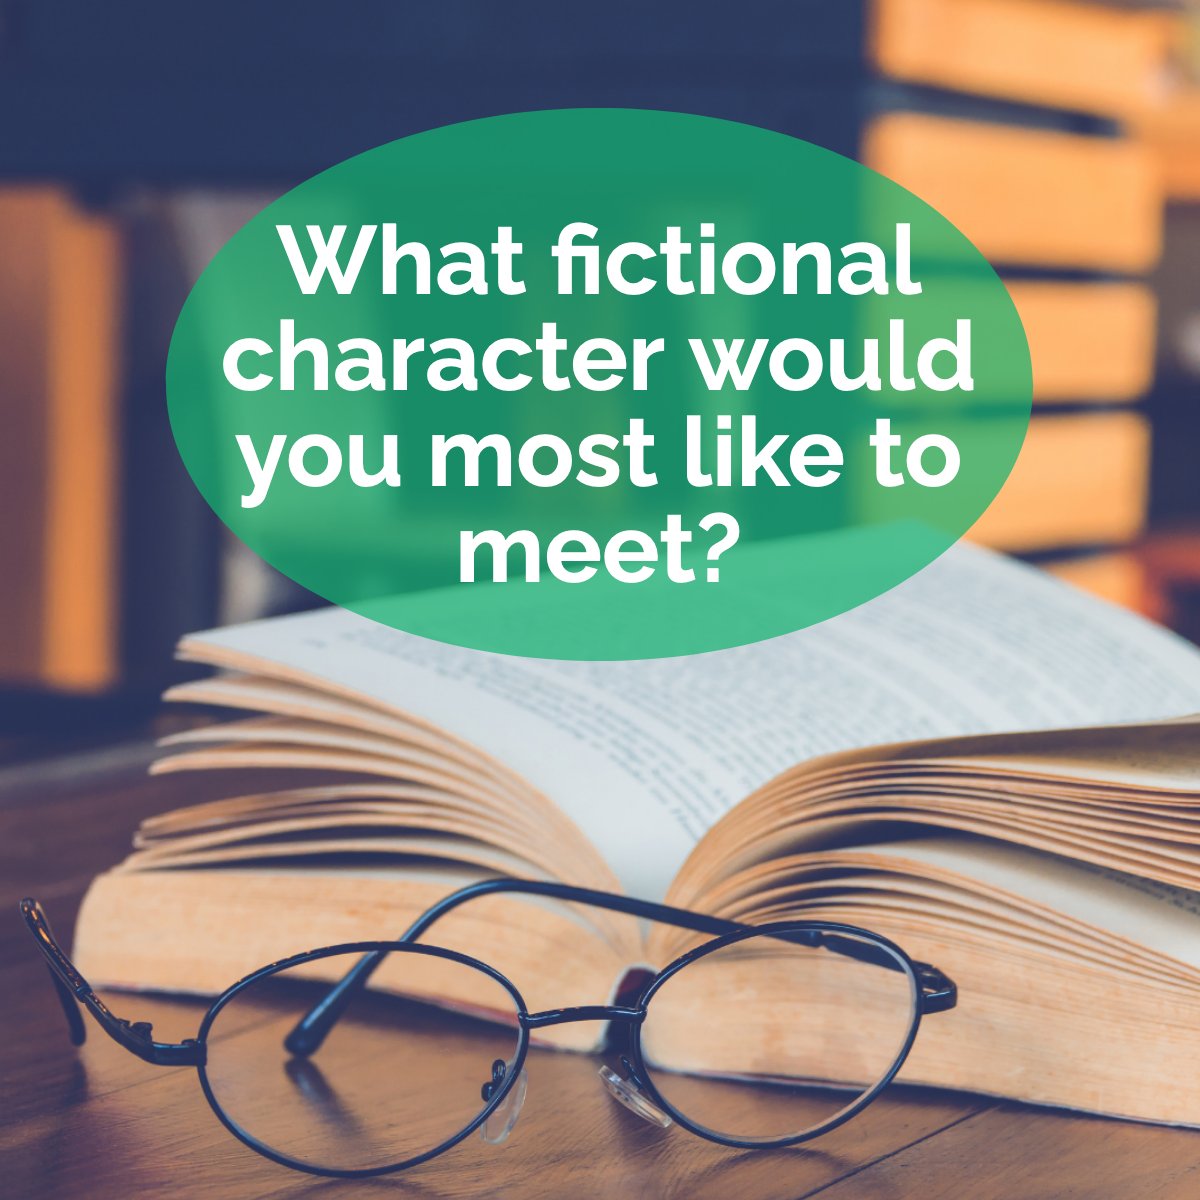 If you had the chance to meet anyone in the fictional world, who would you choose? 💭✨

#fictionbooks    #fictionwriting    #fanfictions    #booklovers    #bookseries
#lasvegasrealtor #lasvegasrealestate #sparrowsells #lasvegashomes #realestate #vegasbaby #realtorlife